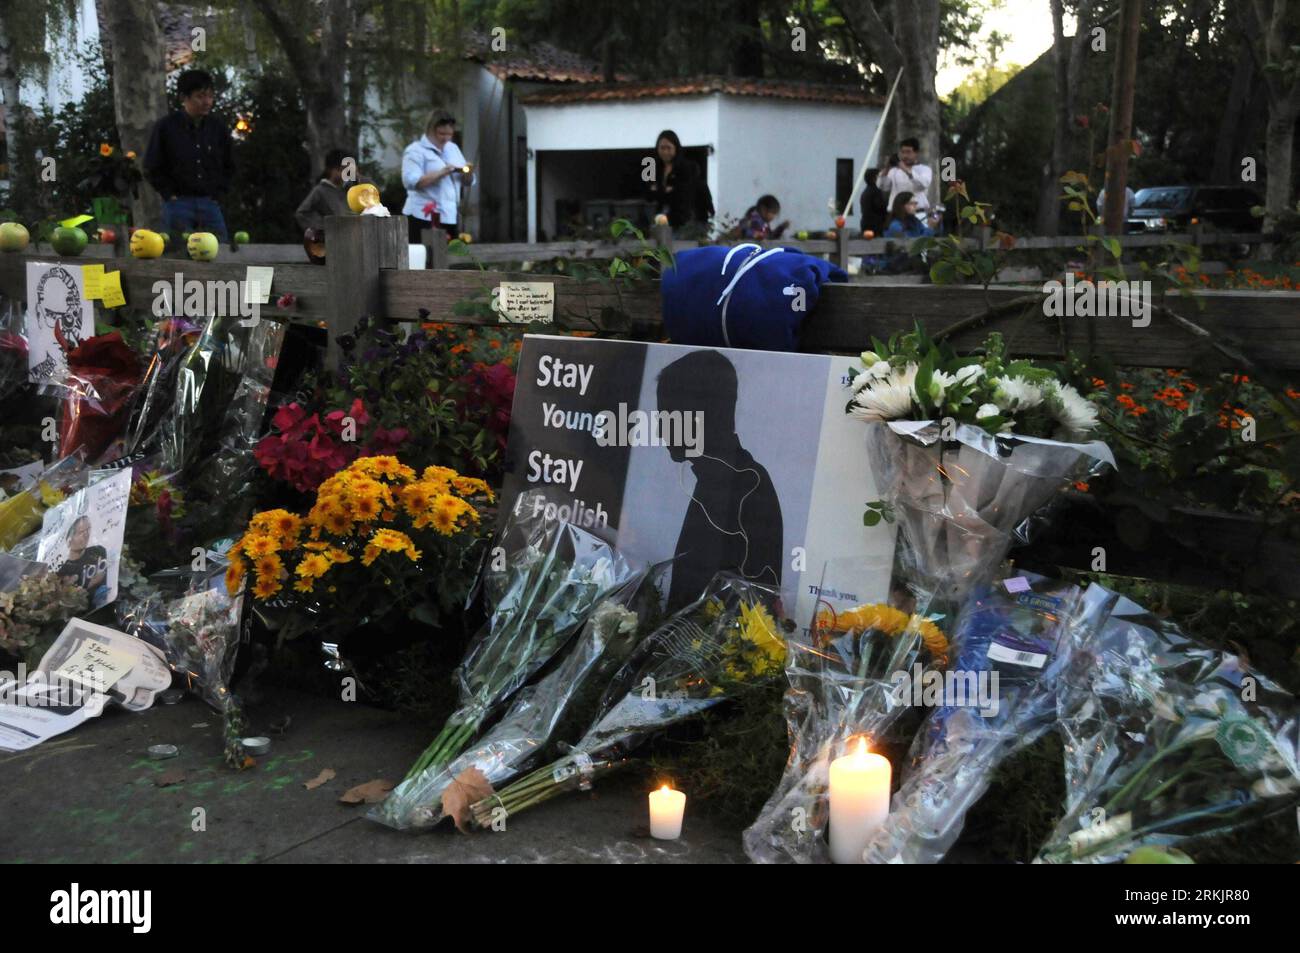 Bildnummer: 56158584  Datum: 07.10.2011  Copyright: imago/Xinhua (111008) -- PALO ALTO, Oct. 8, 2011 (Xinhua) -- pay their respects at a makeshift memorial on the sidewalk outside the home of Steve Jobs in Palo Alto, California, the United States, on Oct. 7, 2011. The funeral of Apple co-founder Steve Jobs was being held on Friday, according to local media. (Xinhua/Li Mi) (yc) U.S.-PALO ALTO-JOBS PUBLICATIONxNOTxINxCHN Wirtschaft Gesellschaft Trauer tot Gedenken Gründer Firmengründer xda x0x premiumd 2011 quer      56158584 Date 07 10 2011 Copyright Imago XINHUA  Palo Alto OCT 8 2011 XINHUA Pa Stock Photo